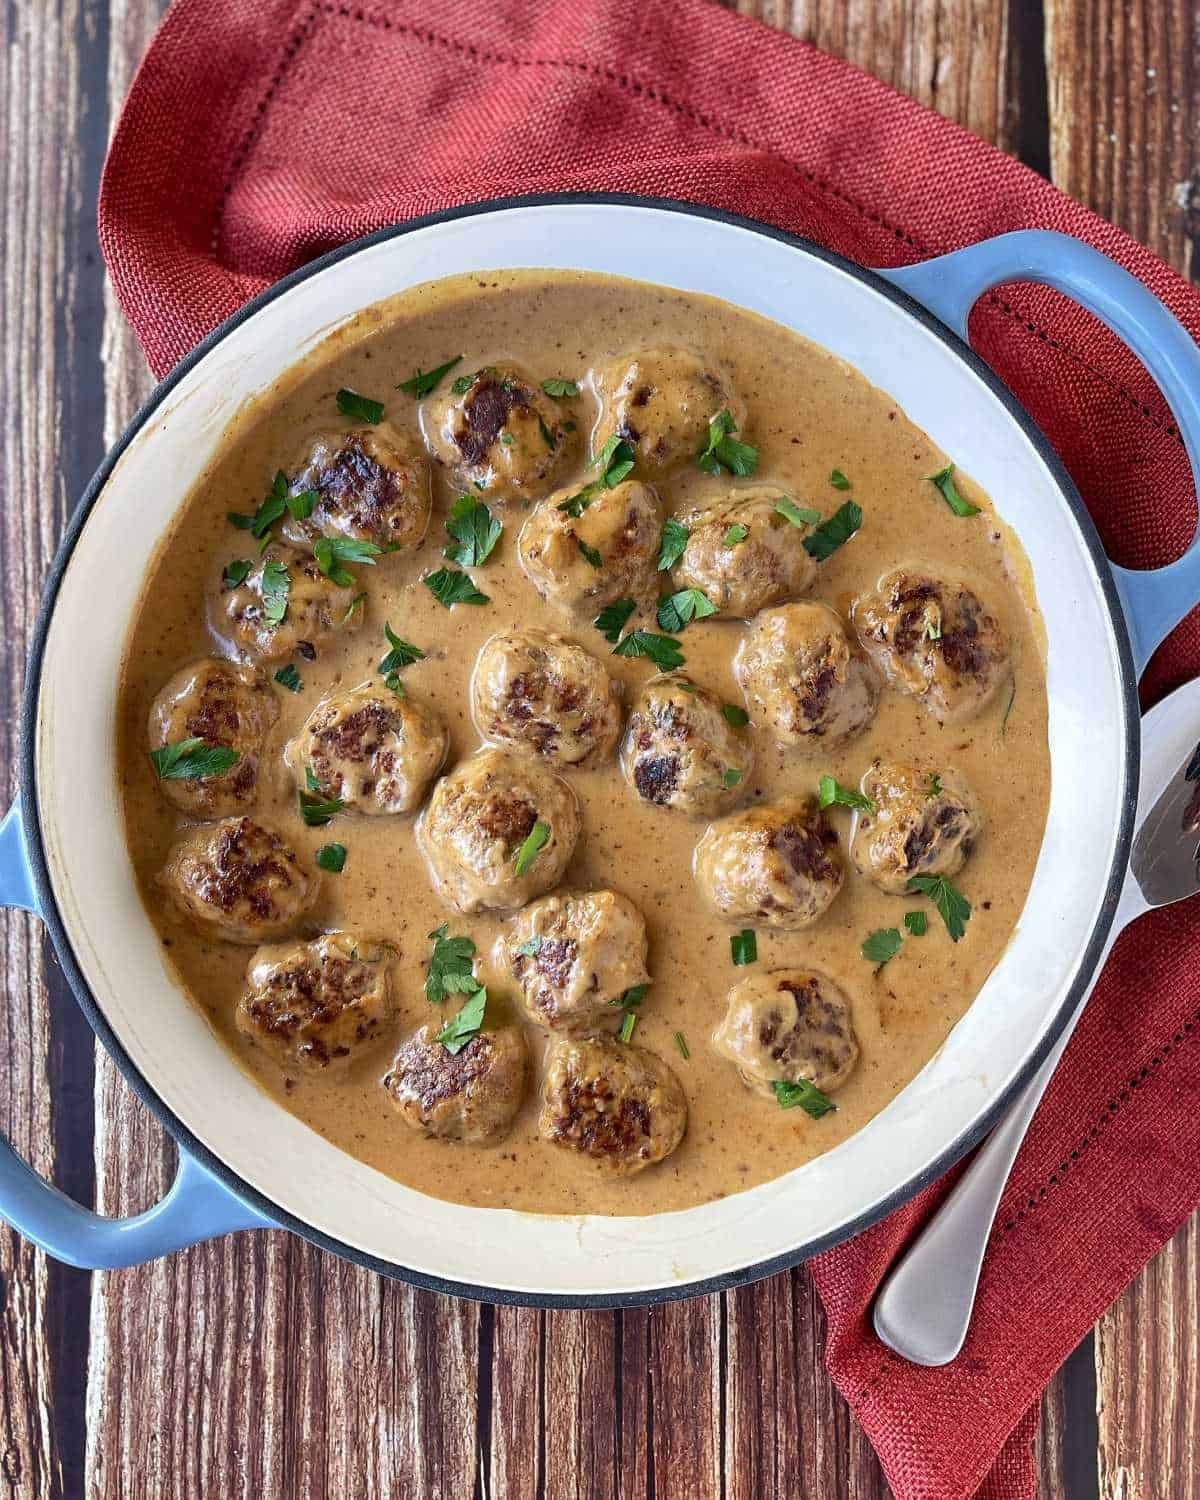 Swedish Meatballs severed in a large blue shallow bowl on a wooden table, a few sprigs of parsley to garnish.